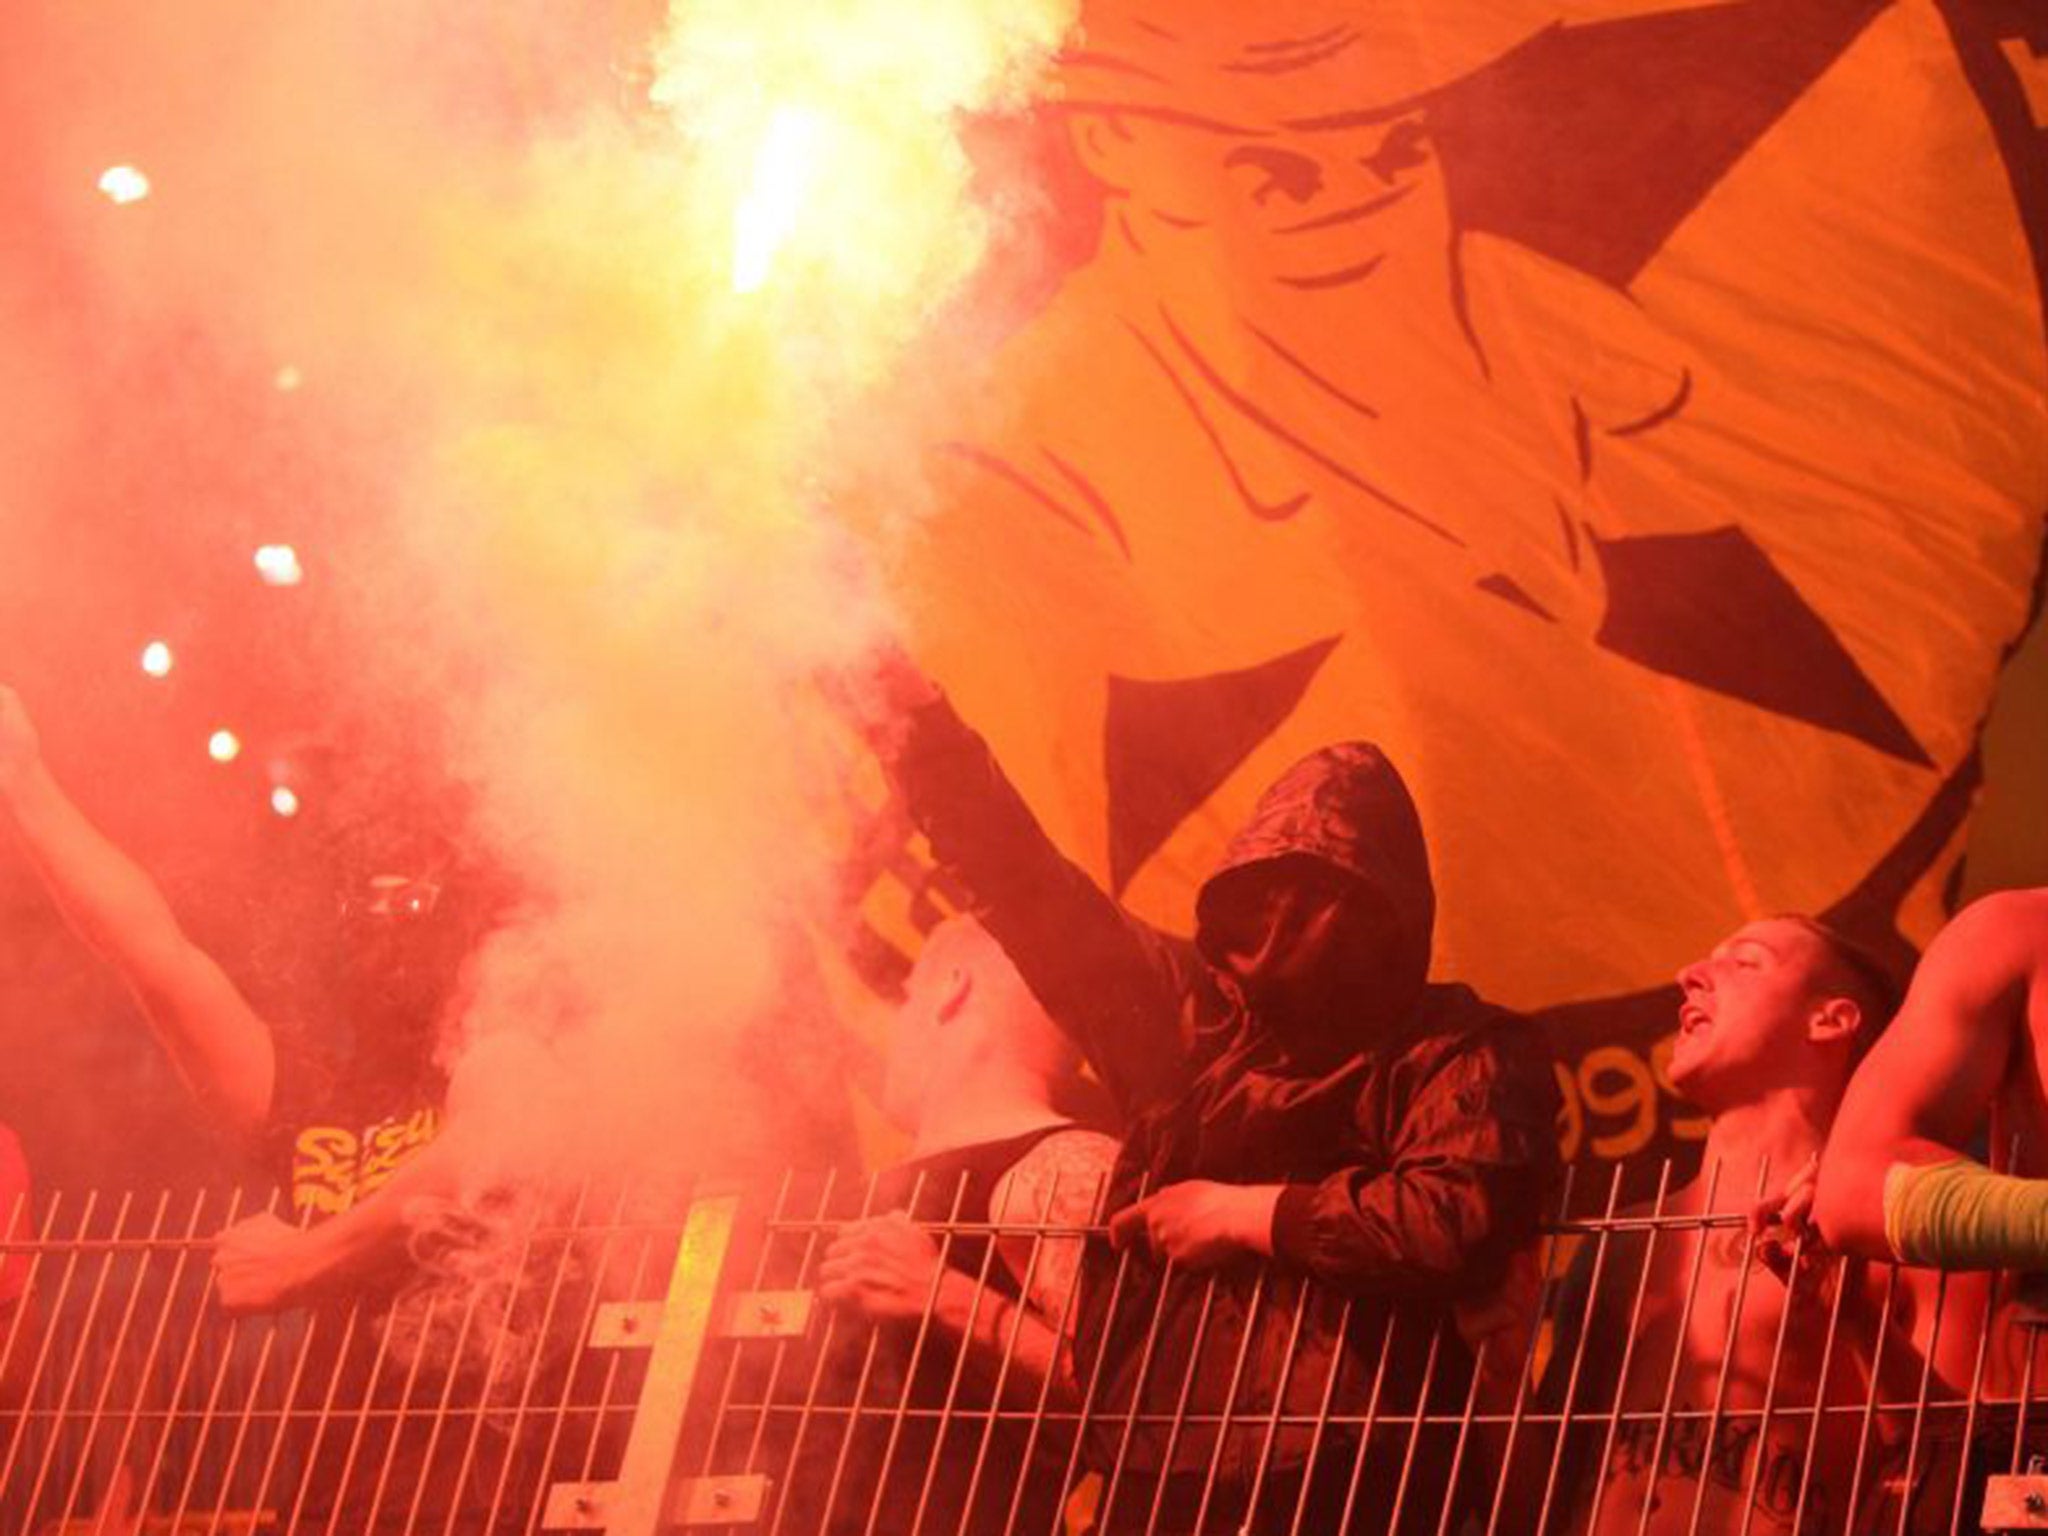 Uefa have charged Legia Warsaw with six offences after crowd trouble marred their Champions League return